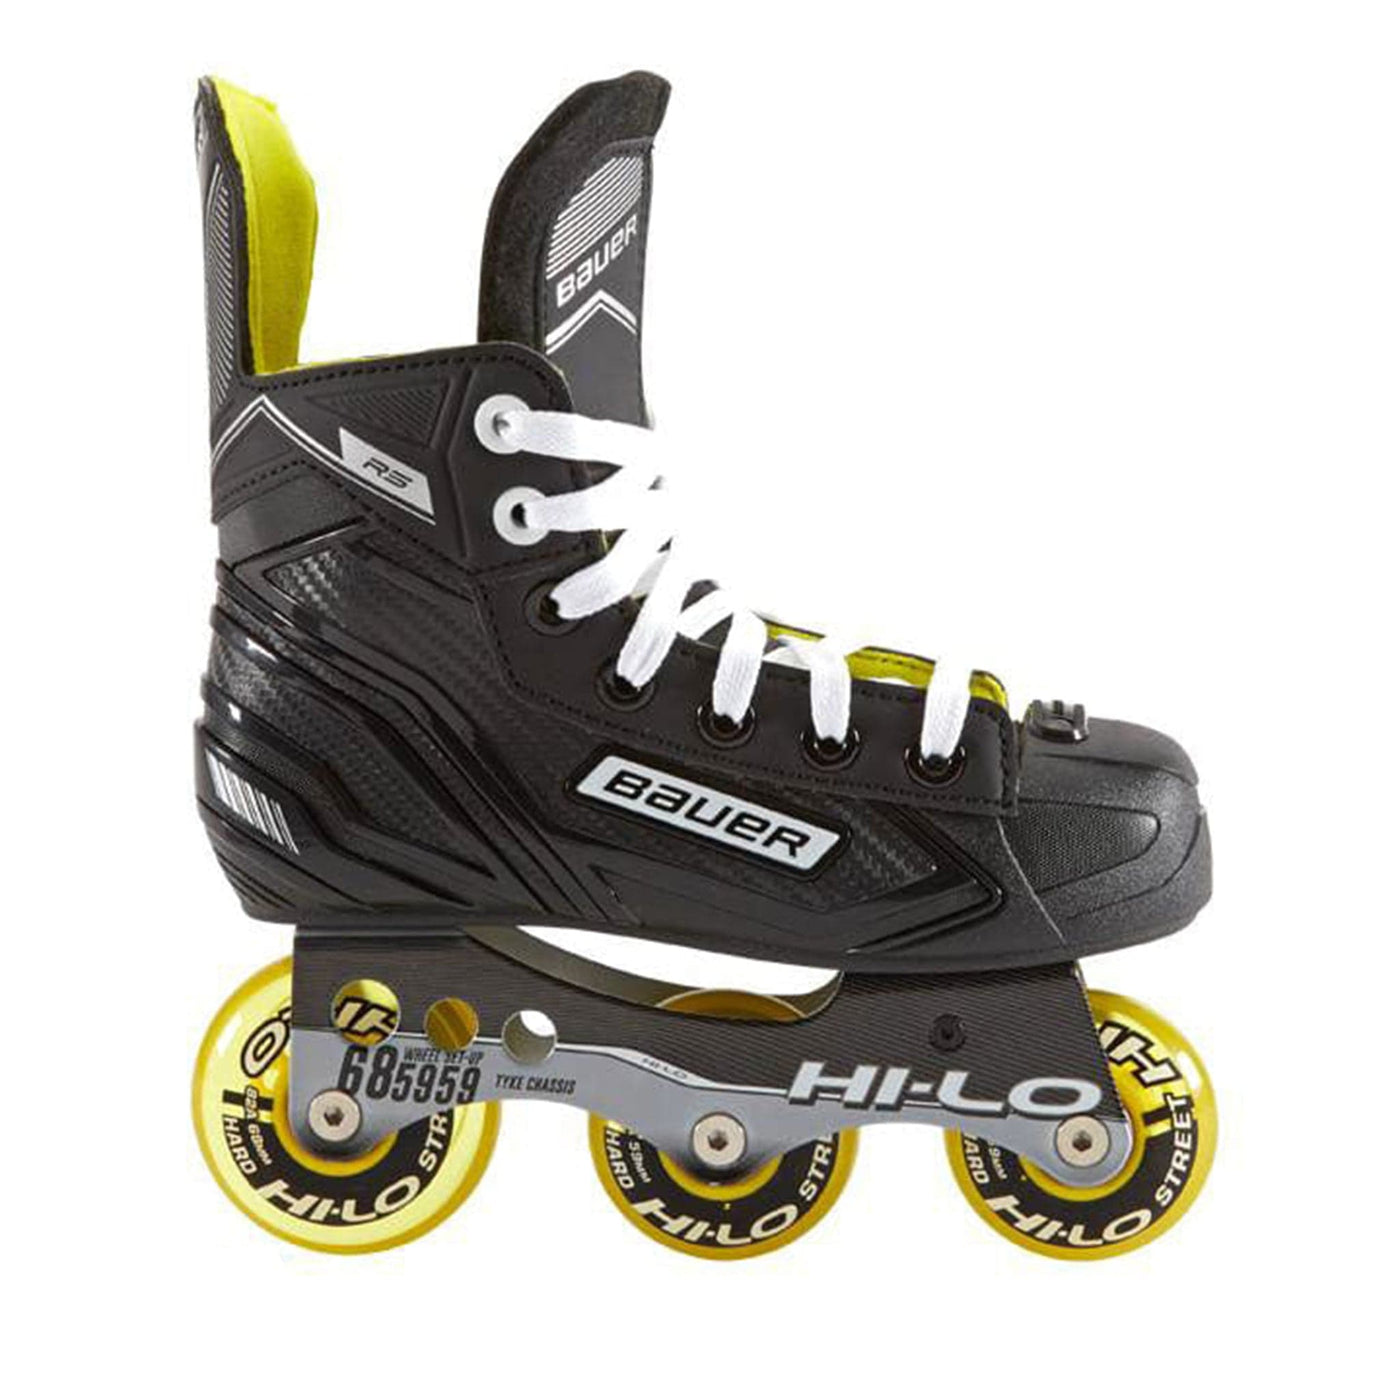 Bauer RS Youth Roller Hockey Skates - The Hockey Shop Source For Sports